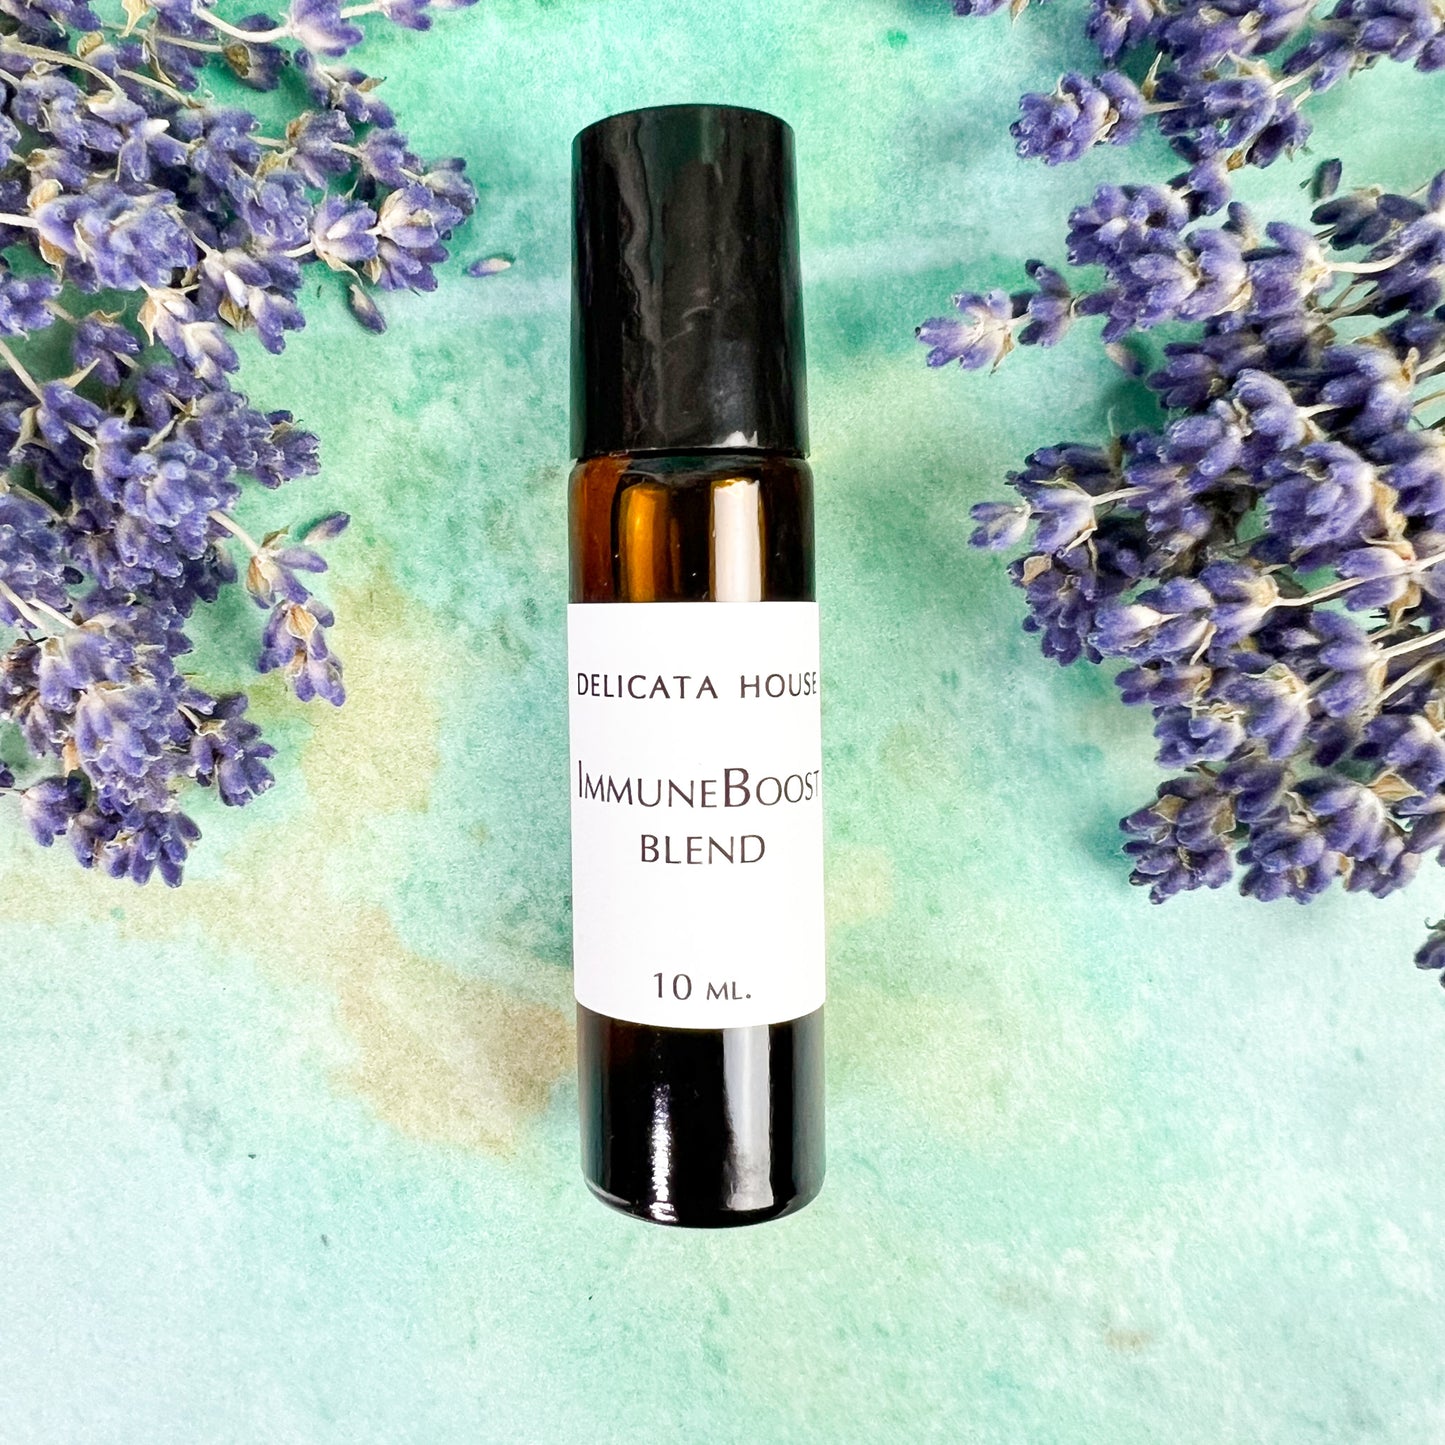 Immune Boost Roll-On - Aromatherapy Blend for Immune Support